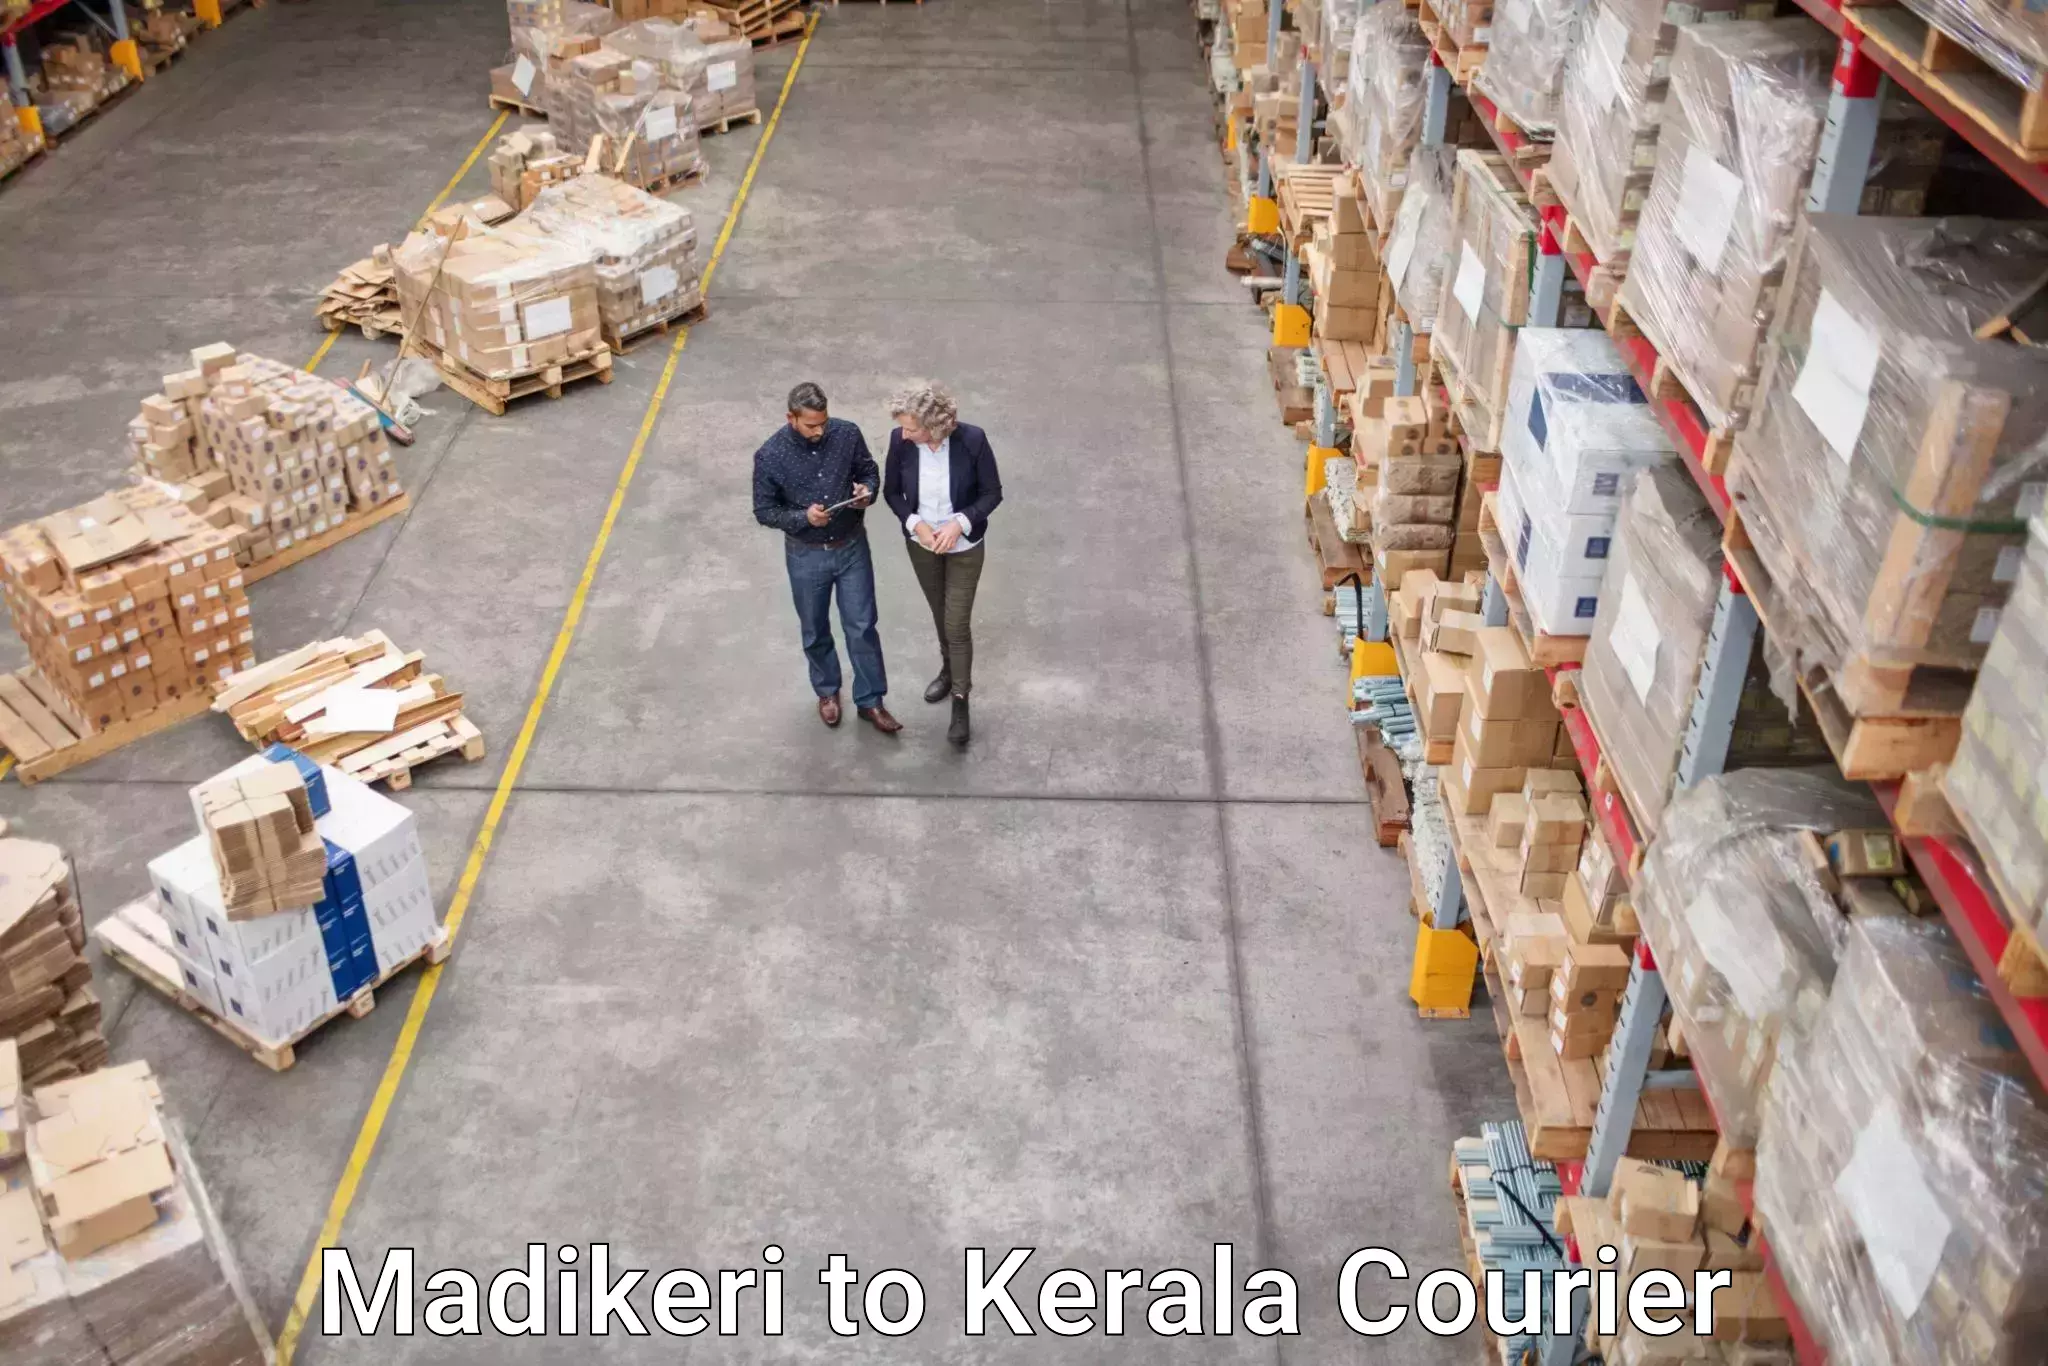 Courier dispatch services Madikeri to Kochi